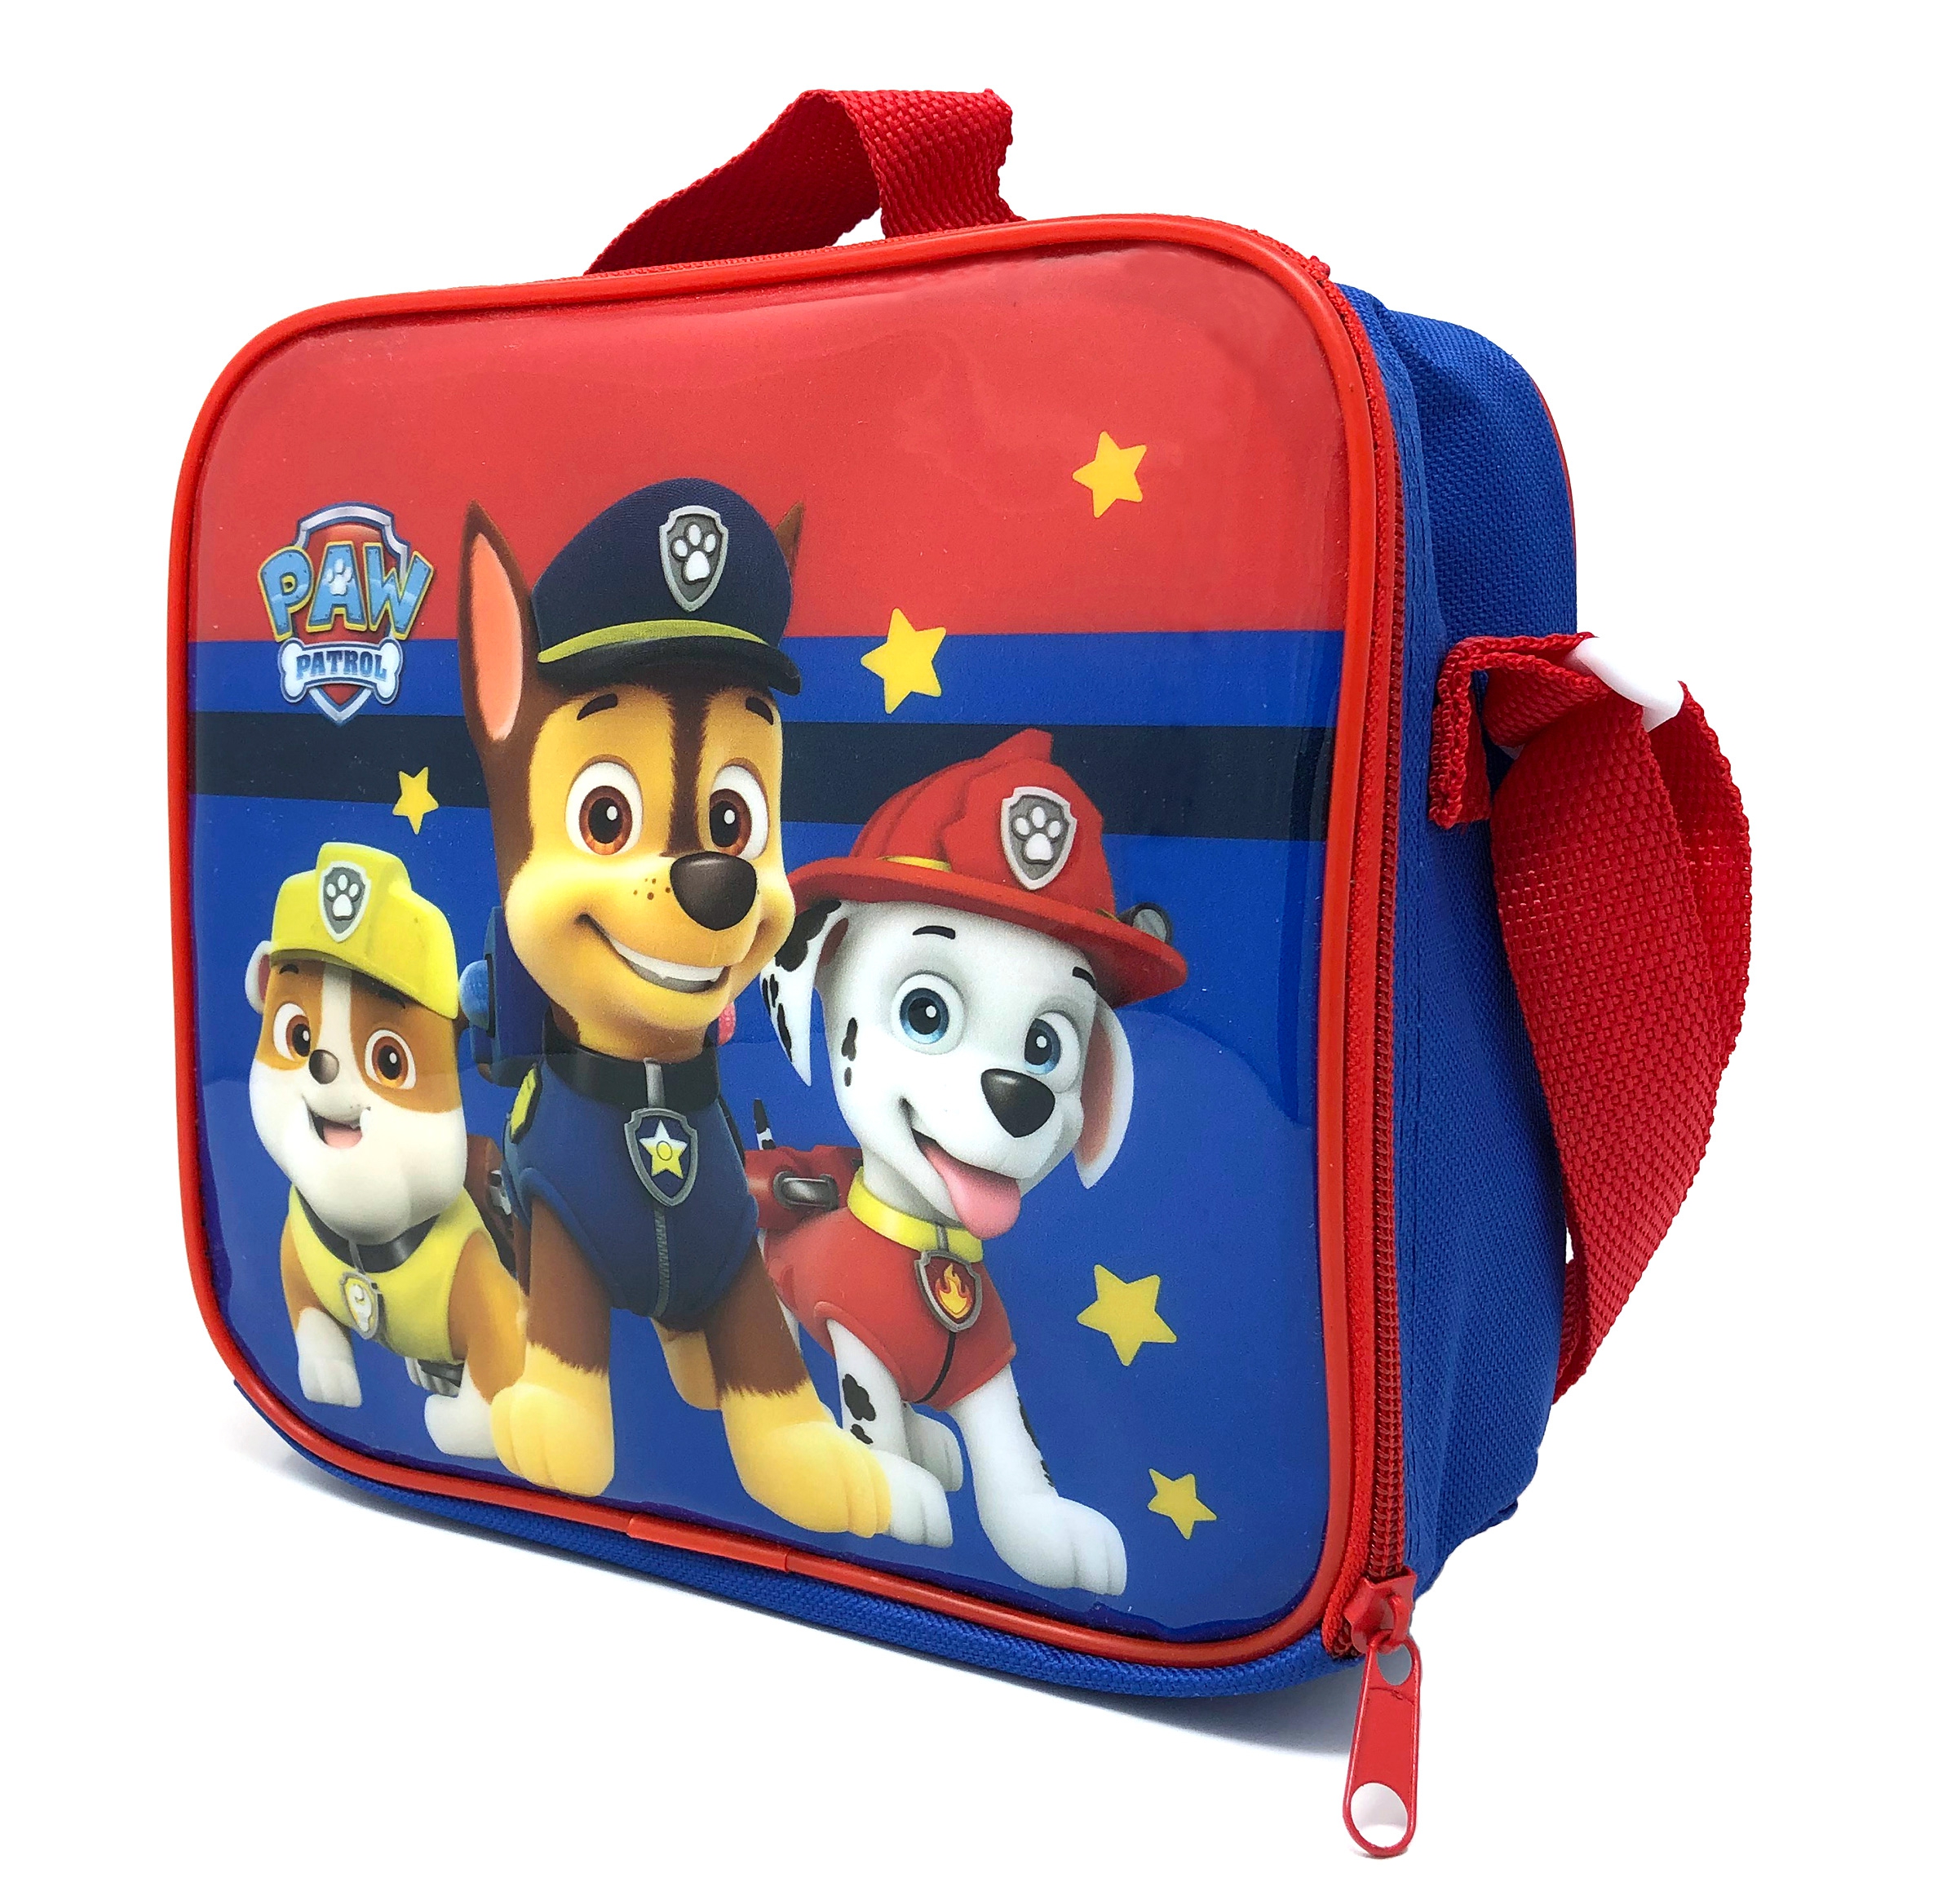 Paw Patrol Blue Kids Thermal Insulated Bag Lunch Box